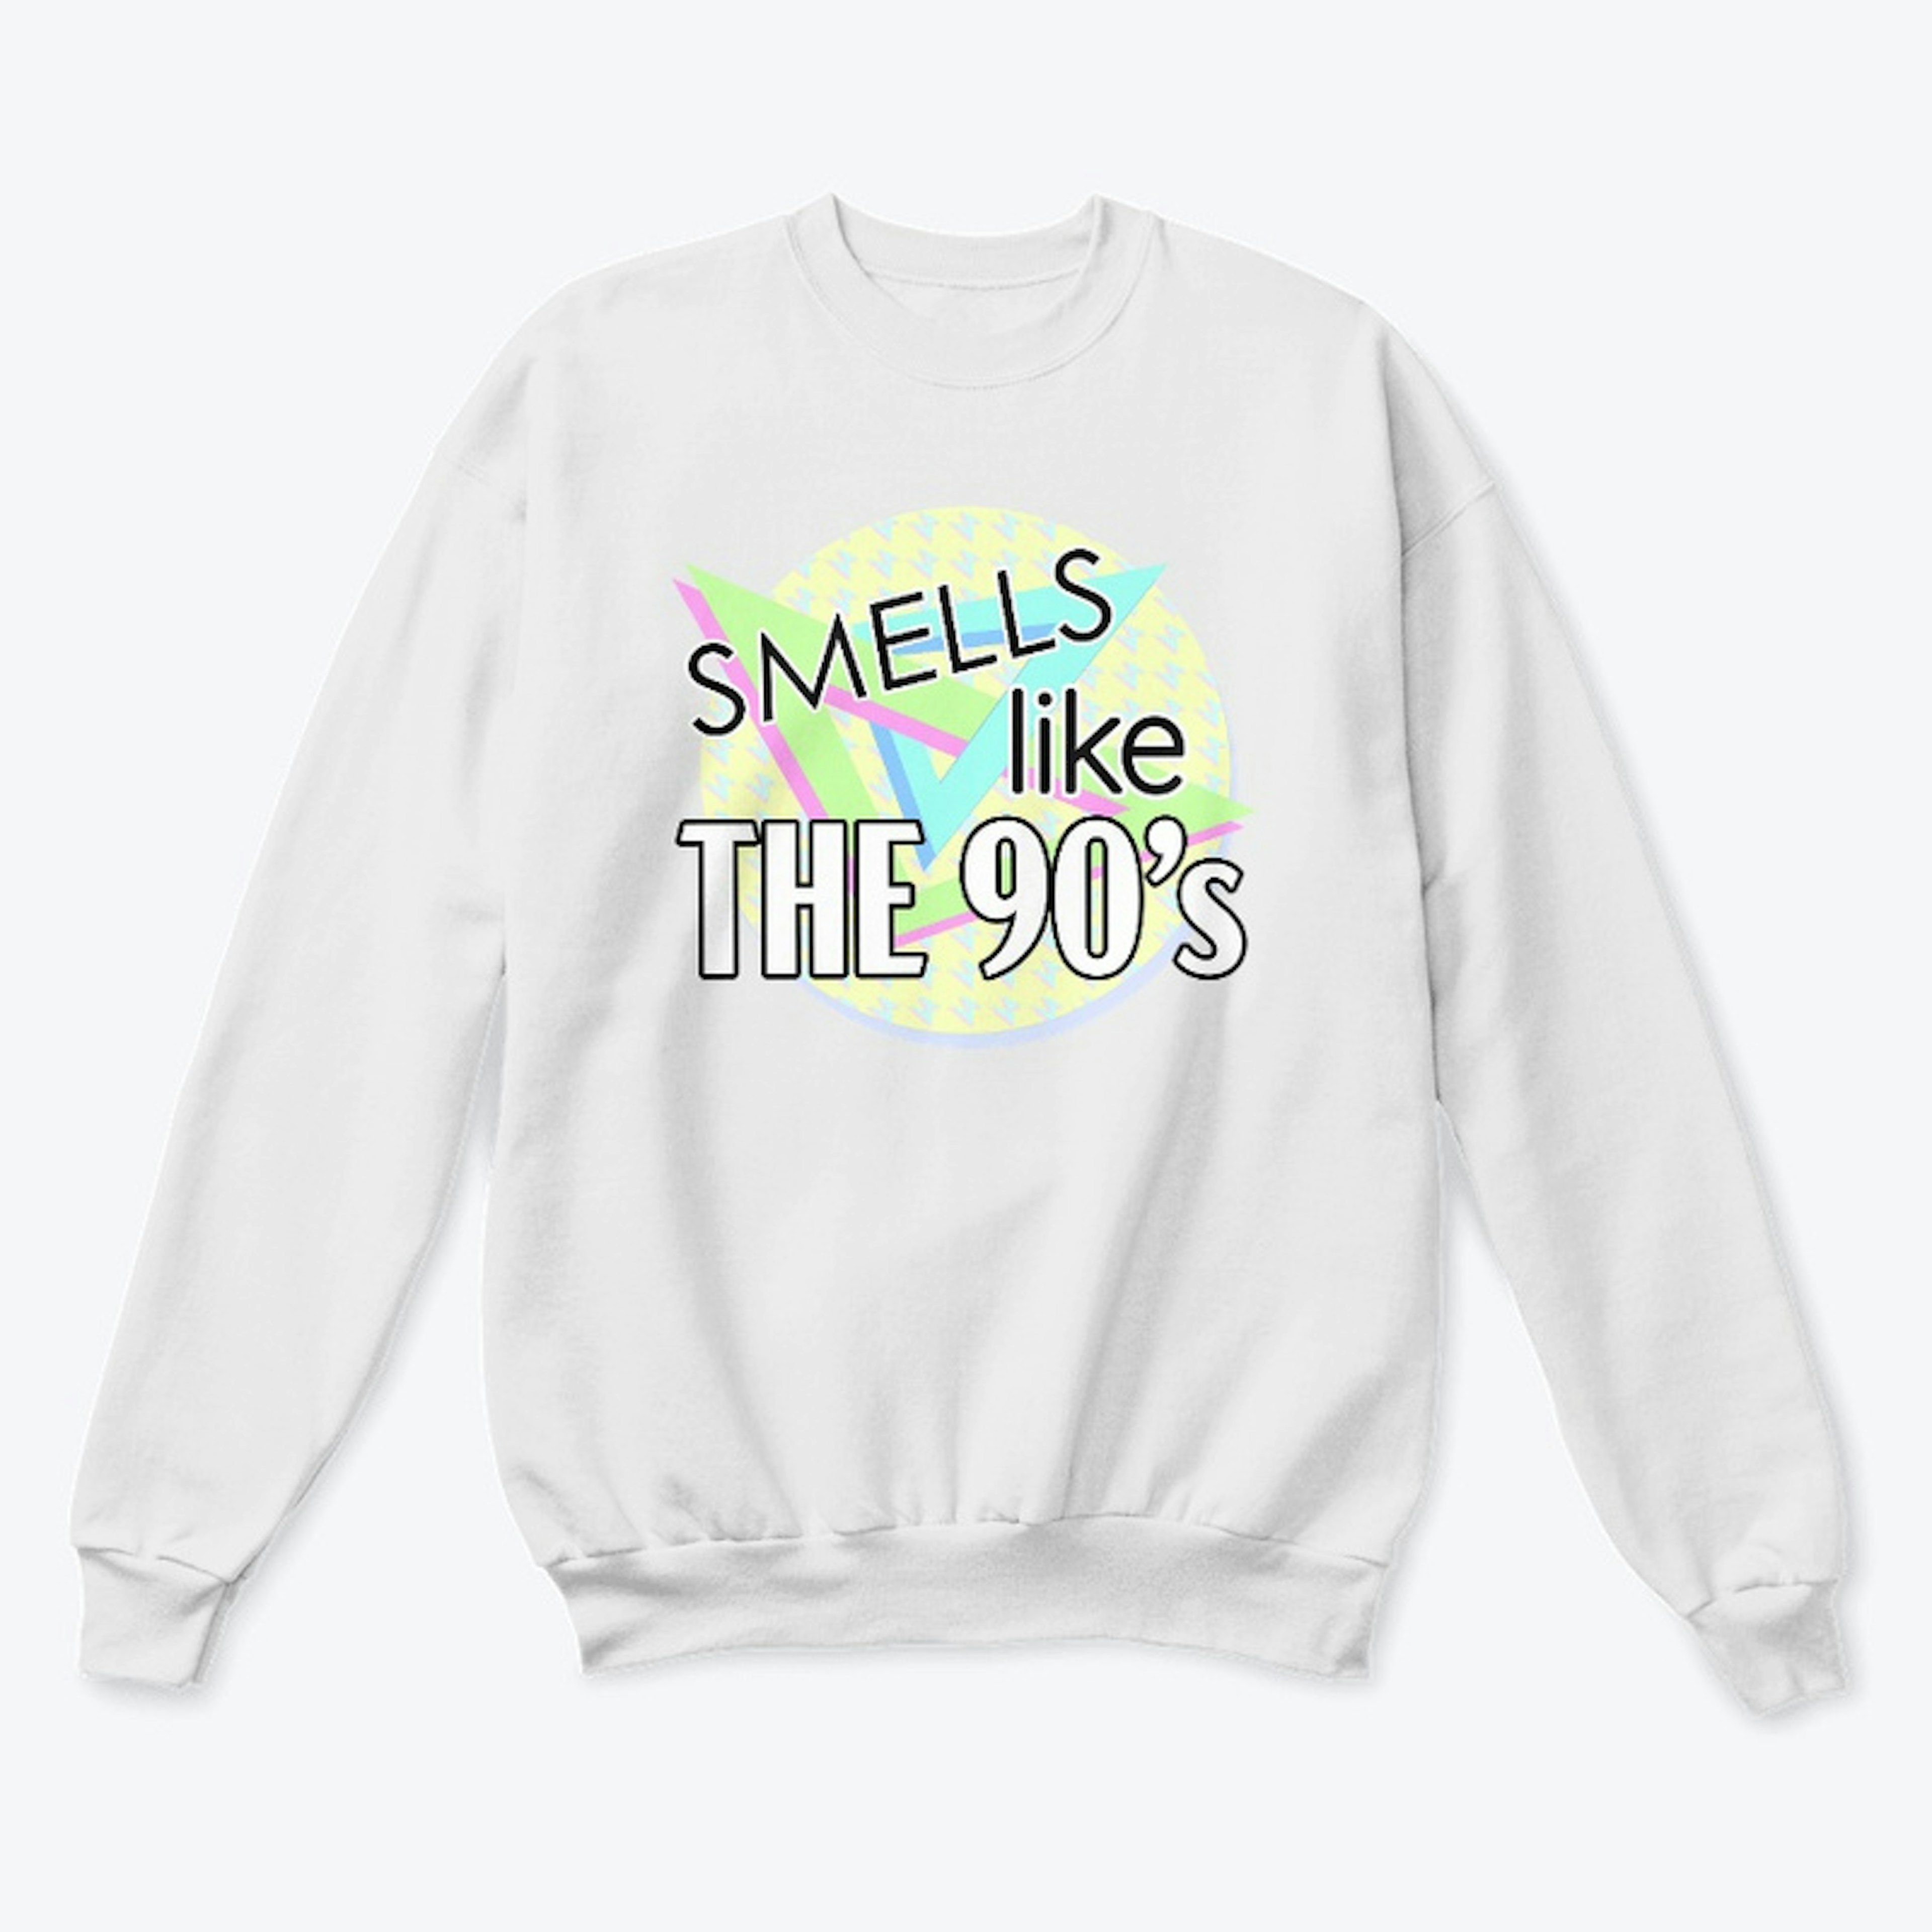 Smells like The 90's